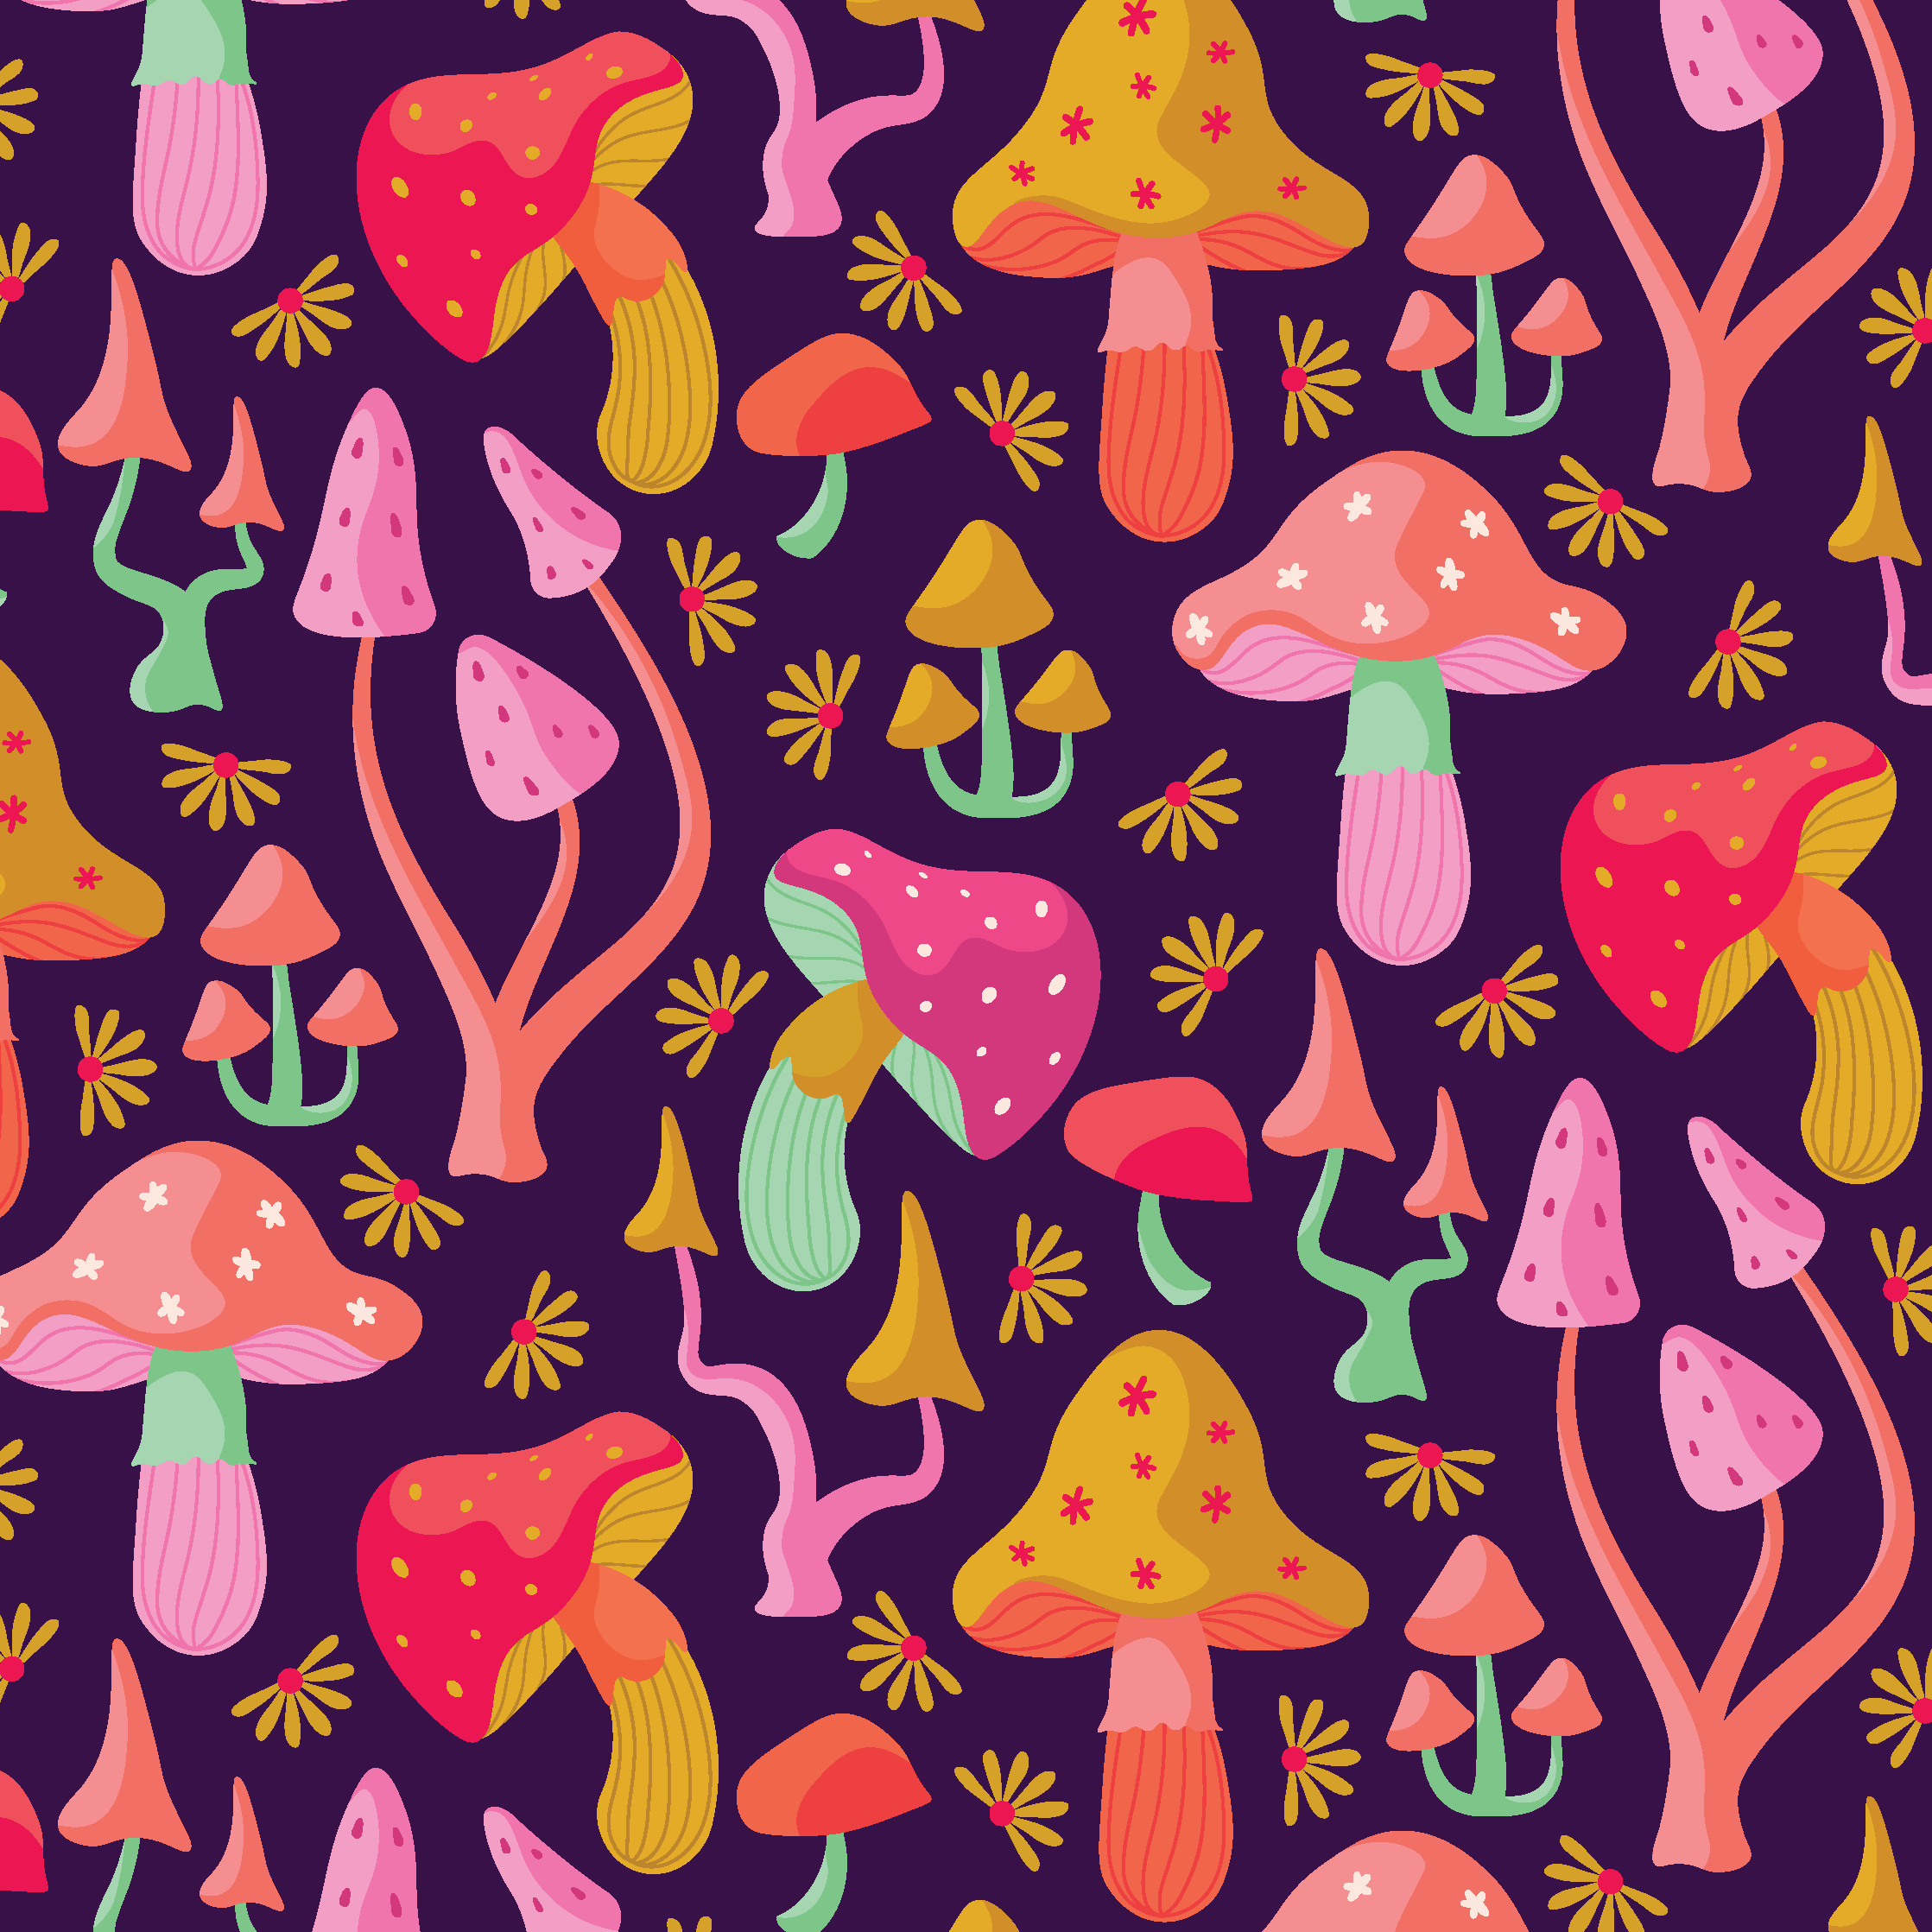 Purple and Colorful Dancing Mushroom Pattern by Elivera Designs 